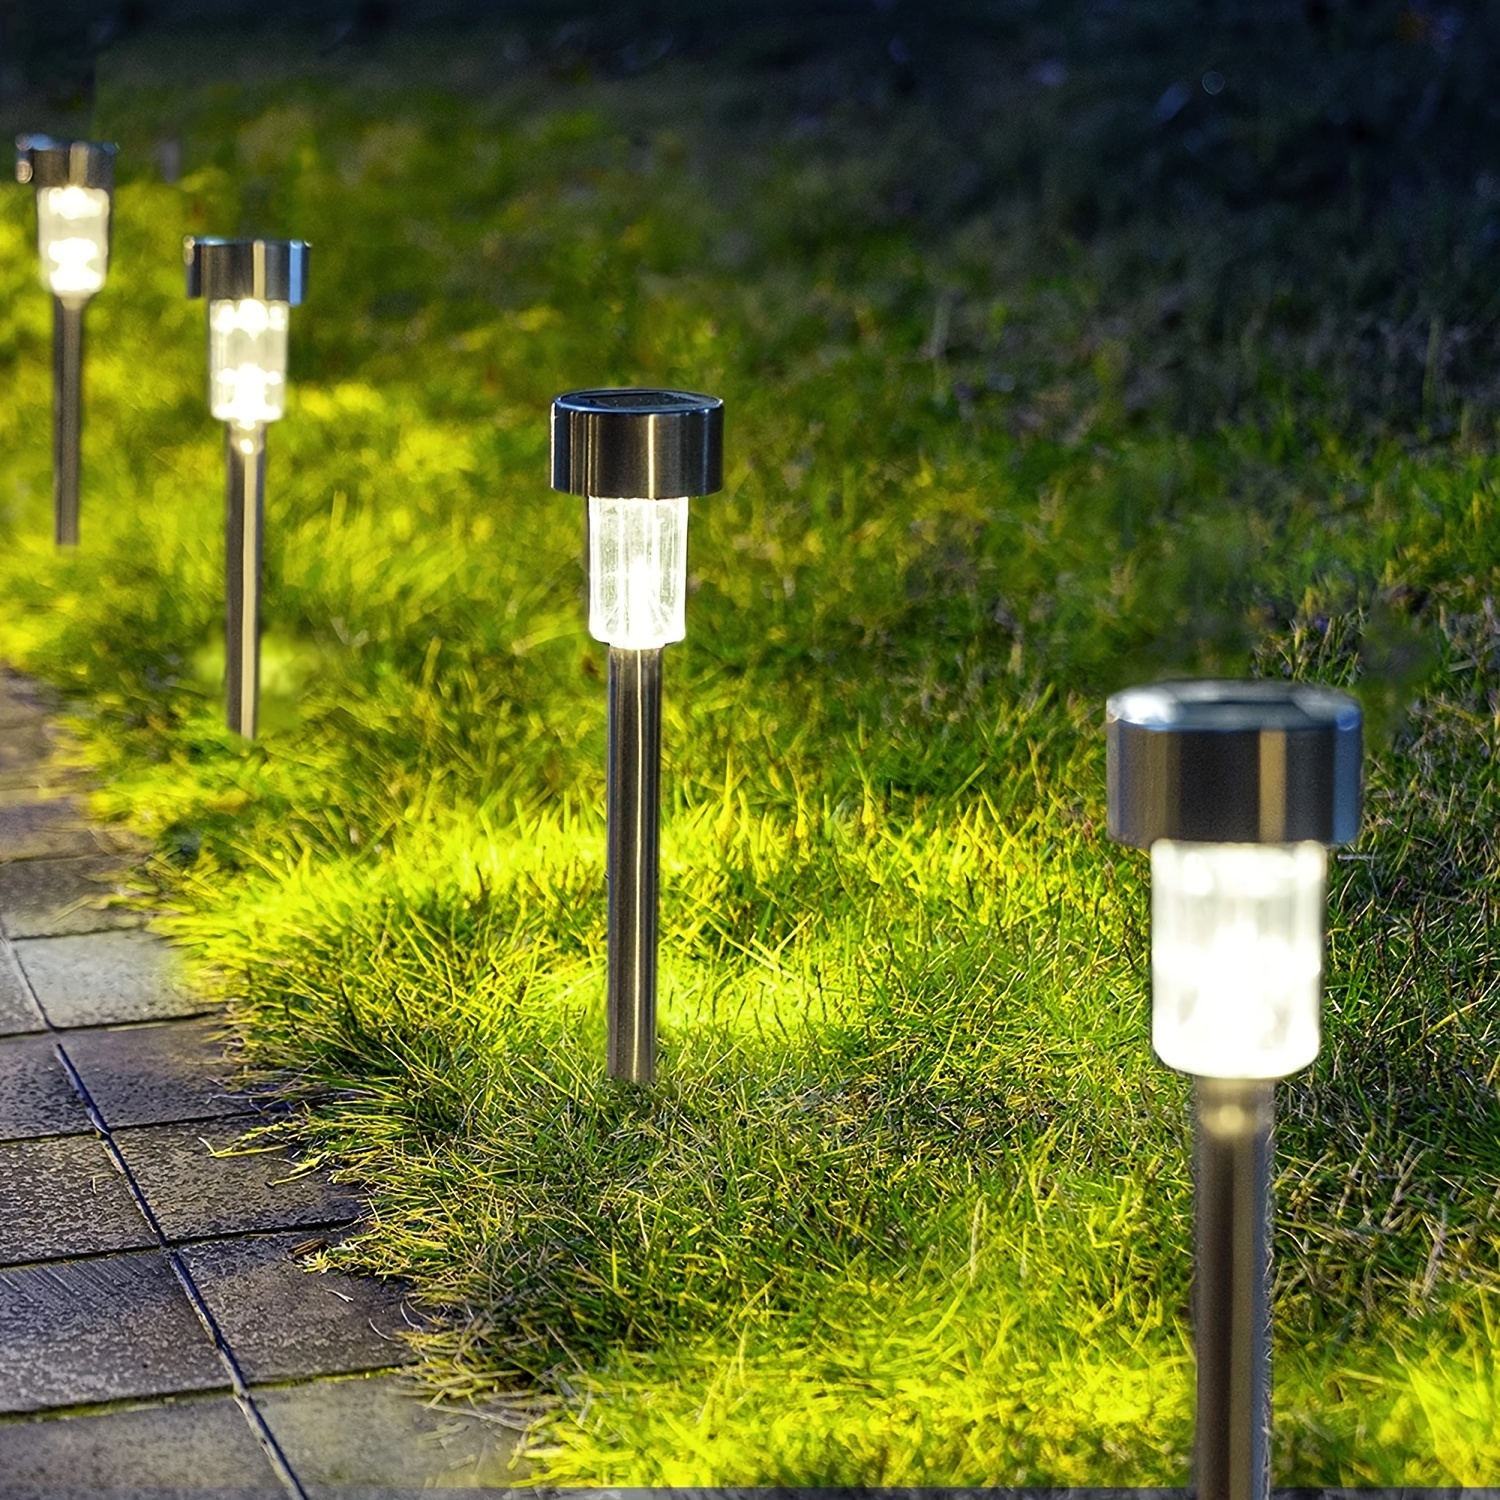 10 Pack Solar Pathway Lights | Lowest Price | Auto On/Off Outdoor LED